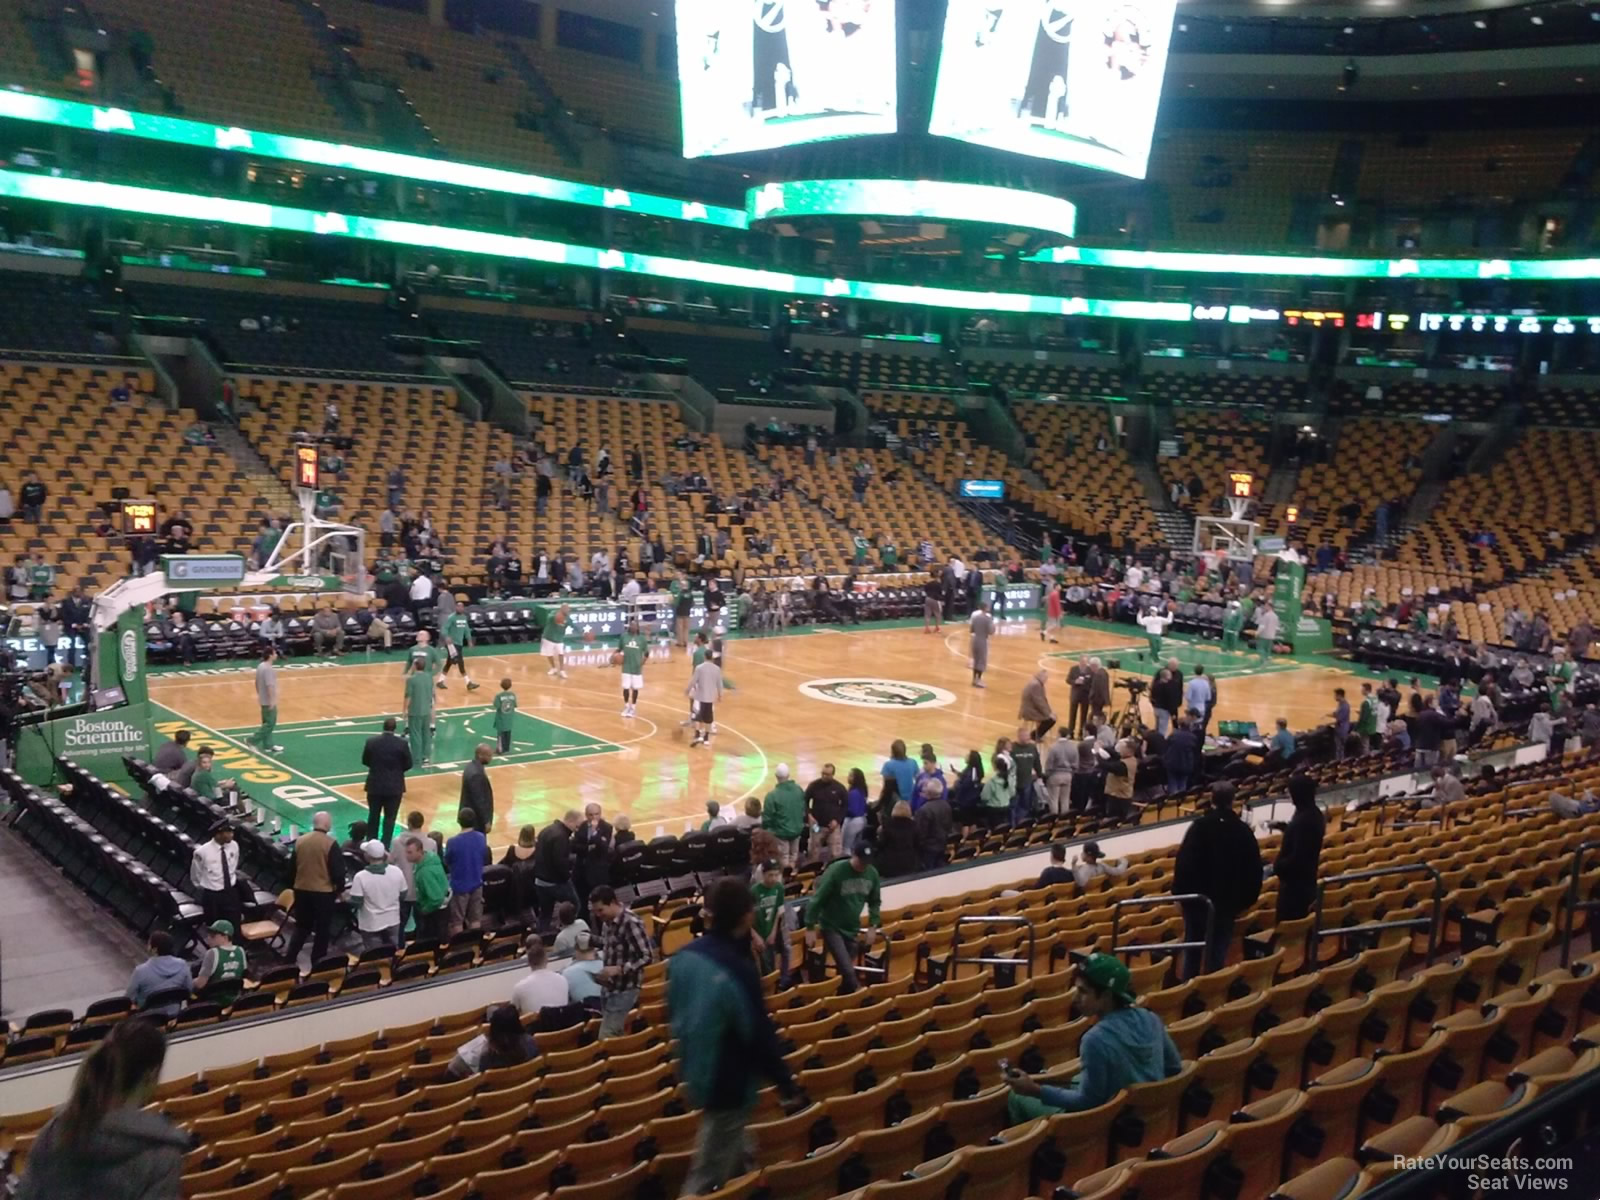 loge 14, row 14 seat view  for basketball - td garden